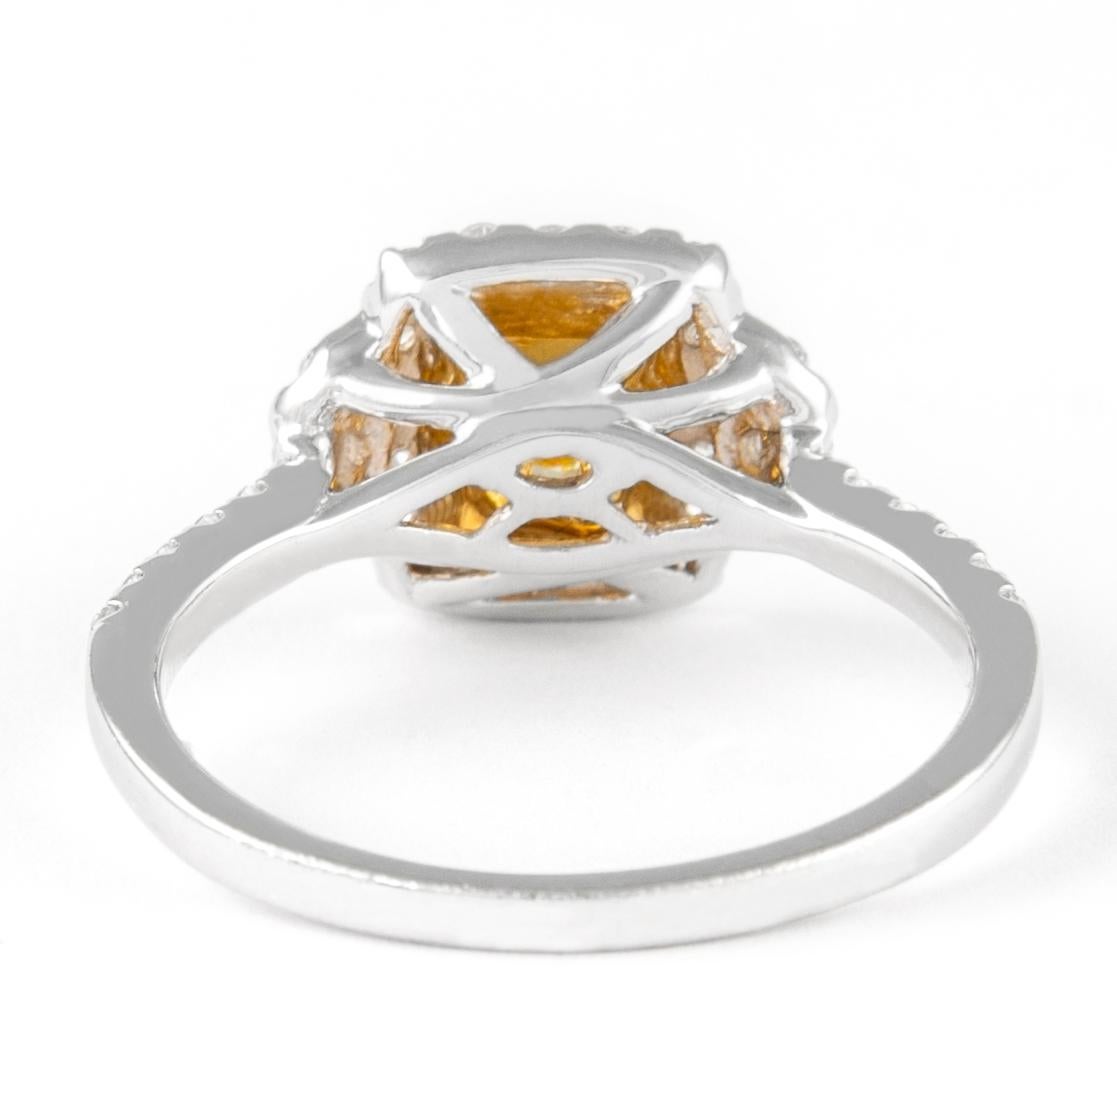 Alexander 1.07ct Fancy Intense Yellow Cushion Diamond with Halo Ring 18k In New Condition For Sale In BEVERLY HILLS, CA